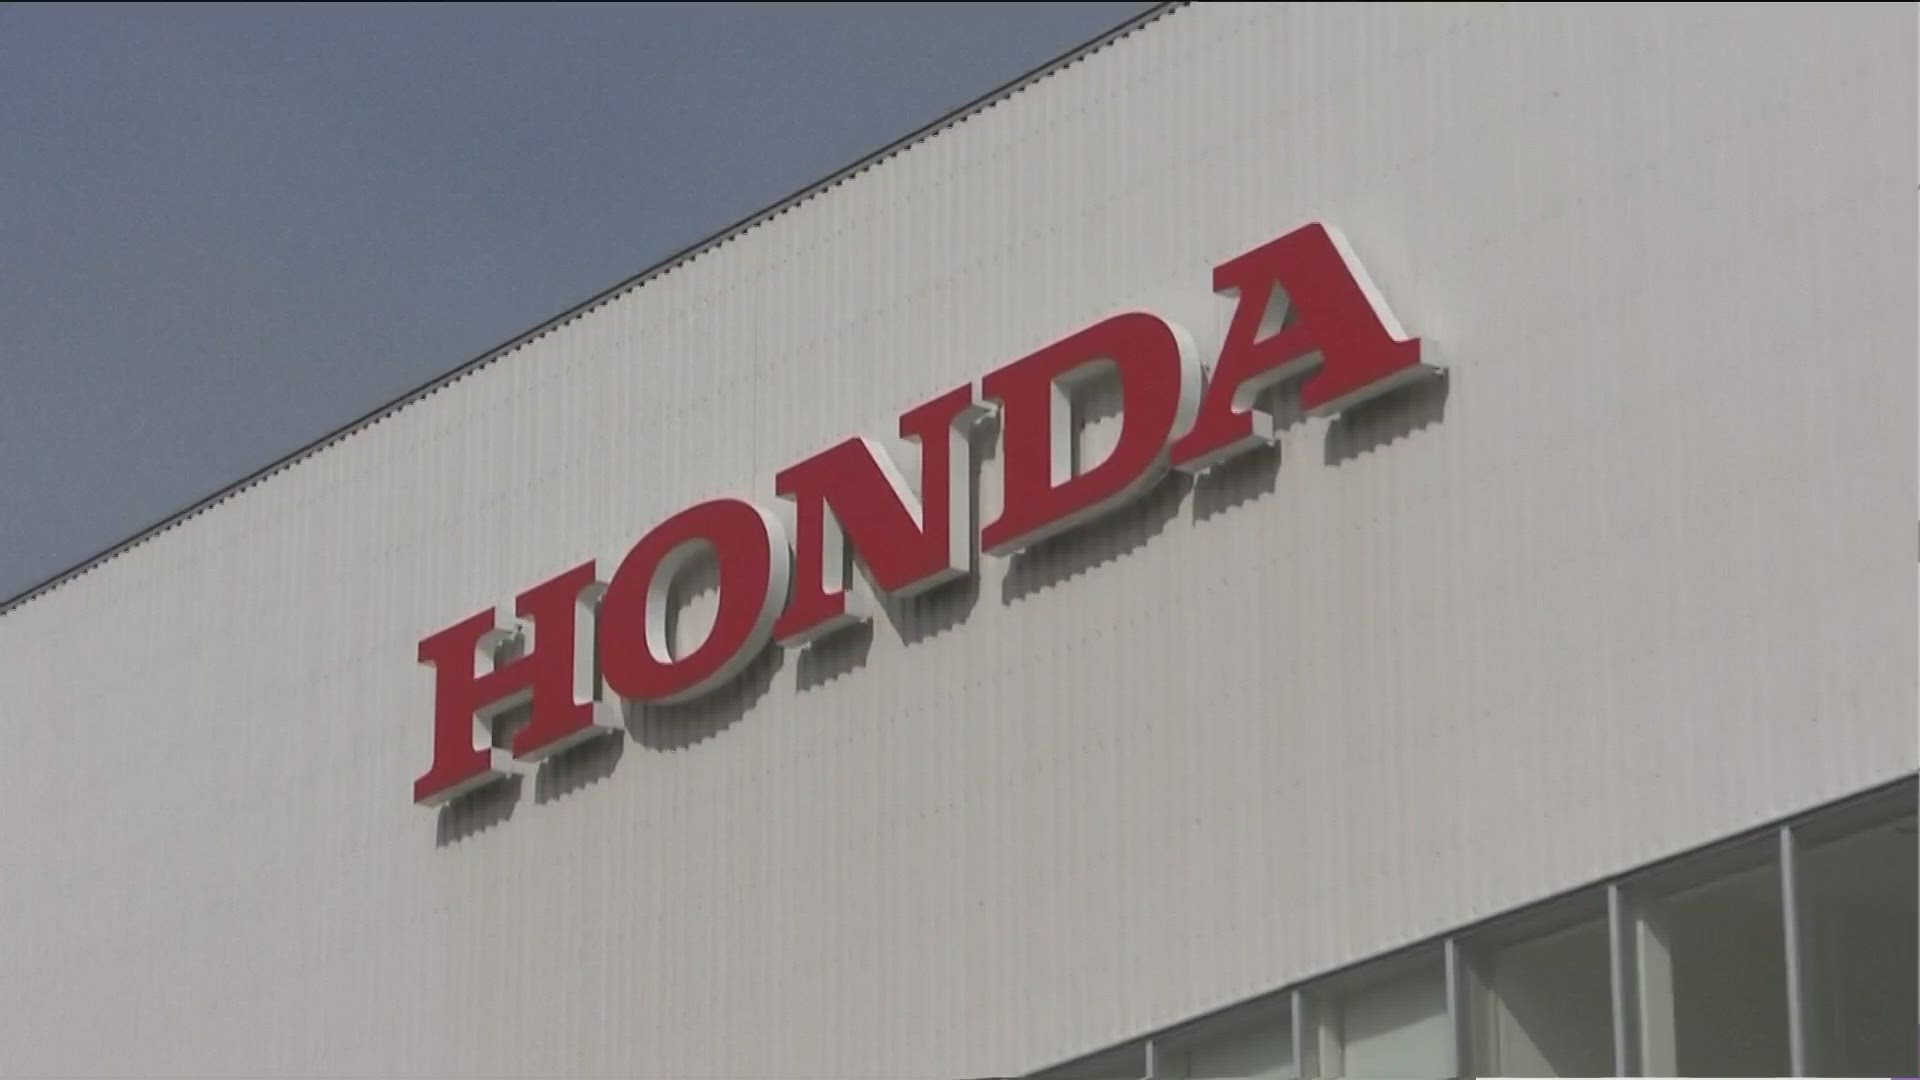 Dealers will inspect the SUVs and install a support brace or repair the rear frame if needed. If the frame is badly damaged, Honda may offer to buy the vehicle.